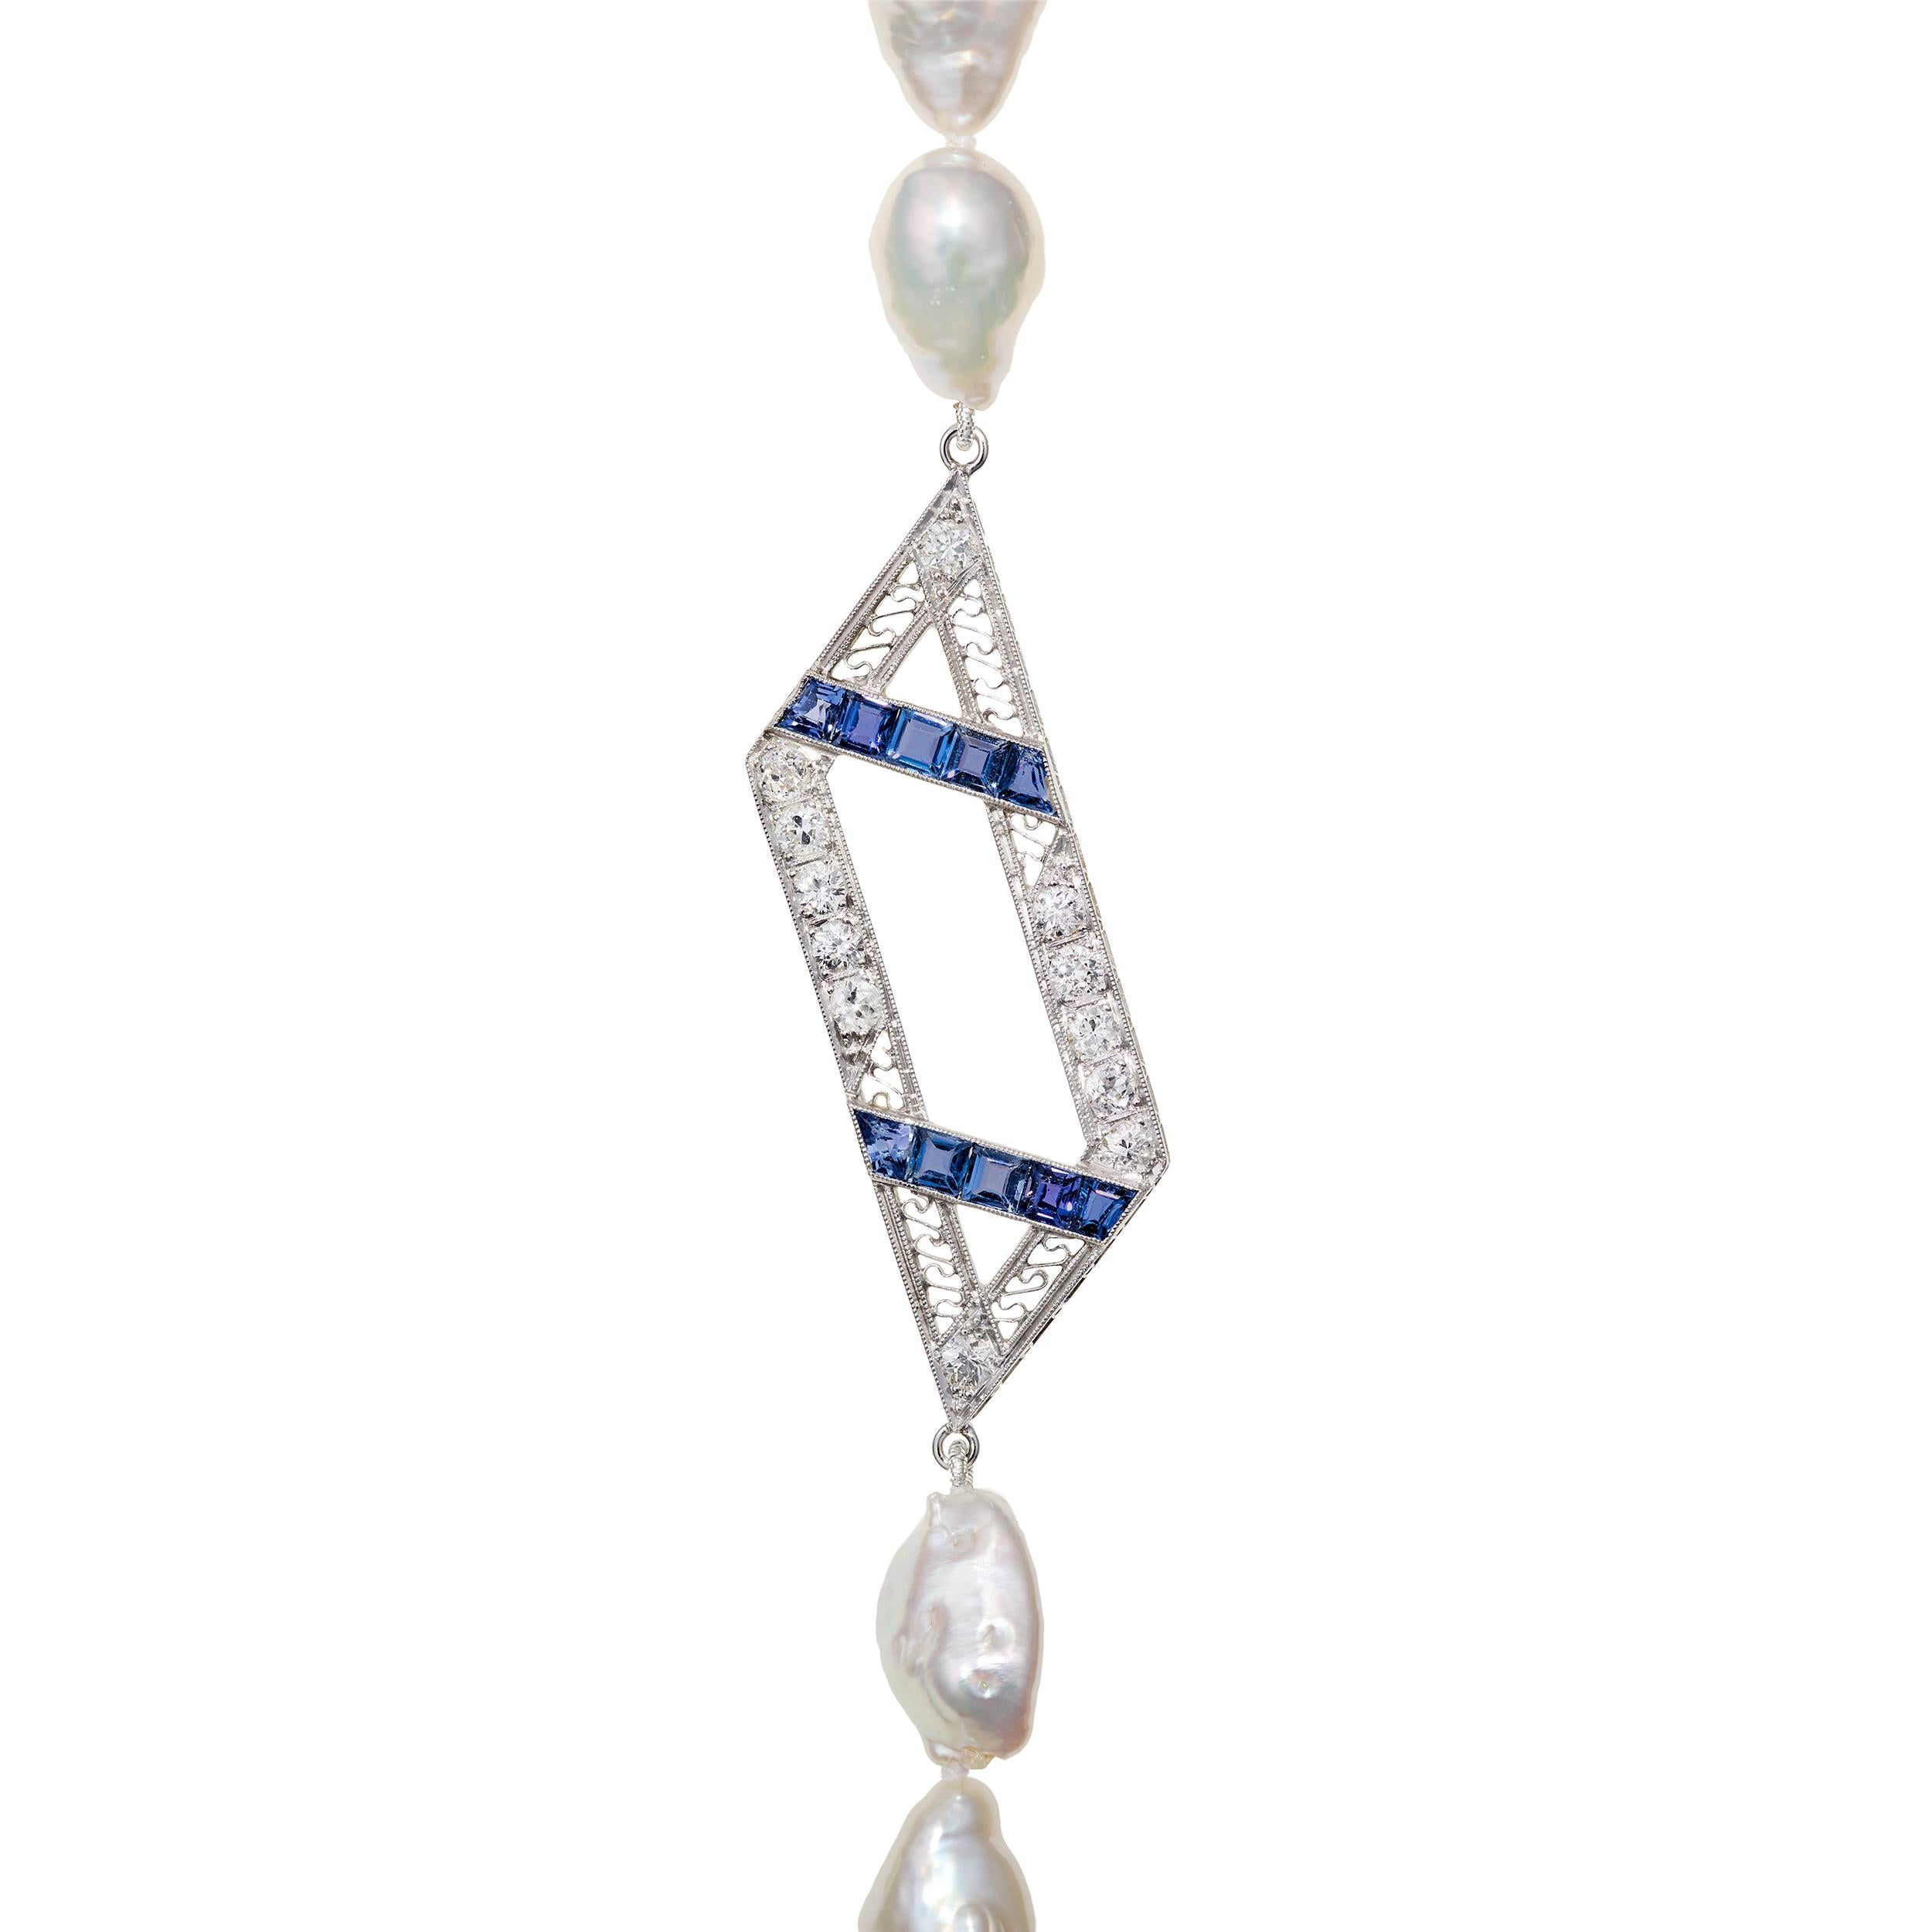 Gorgeous long necklace featuring a stunning Art Deco focal point.  One of a kind and hand knotted between each pearl.

Sapphire and Diamond Focal Point weighting approximately 3.5 Carats Total Weight
(53) South Sea Keshi Pearls

Length: 